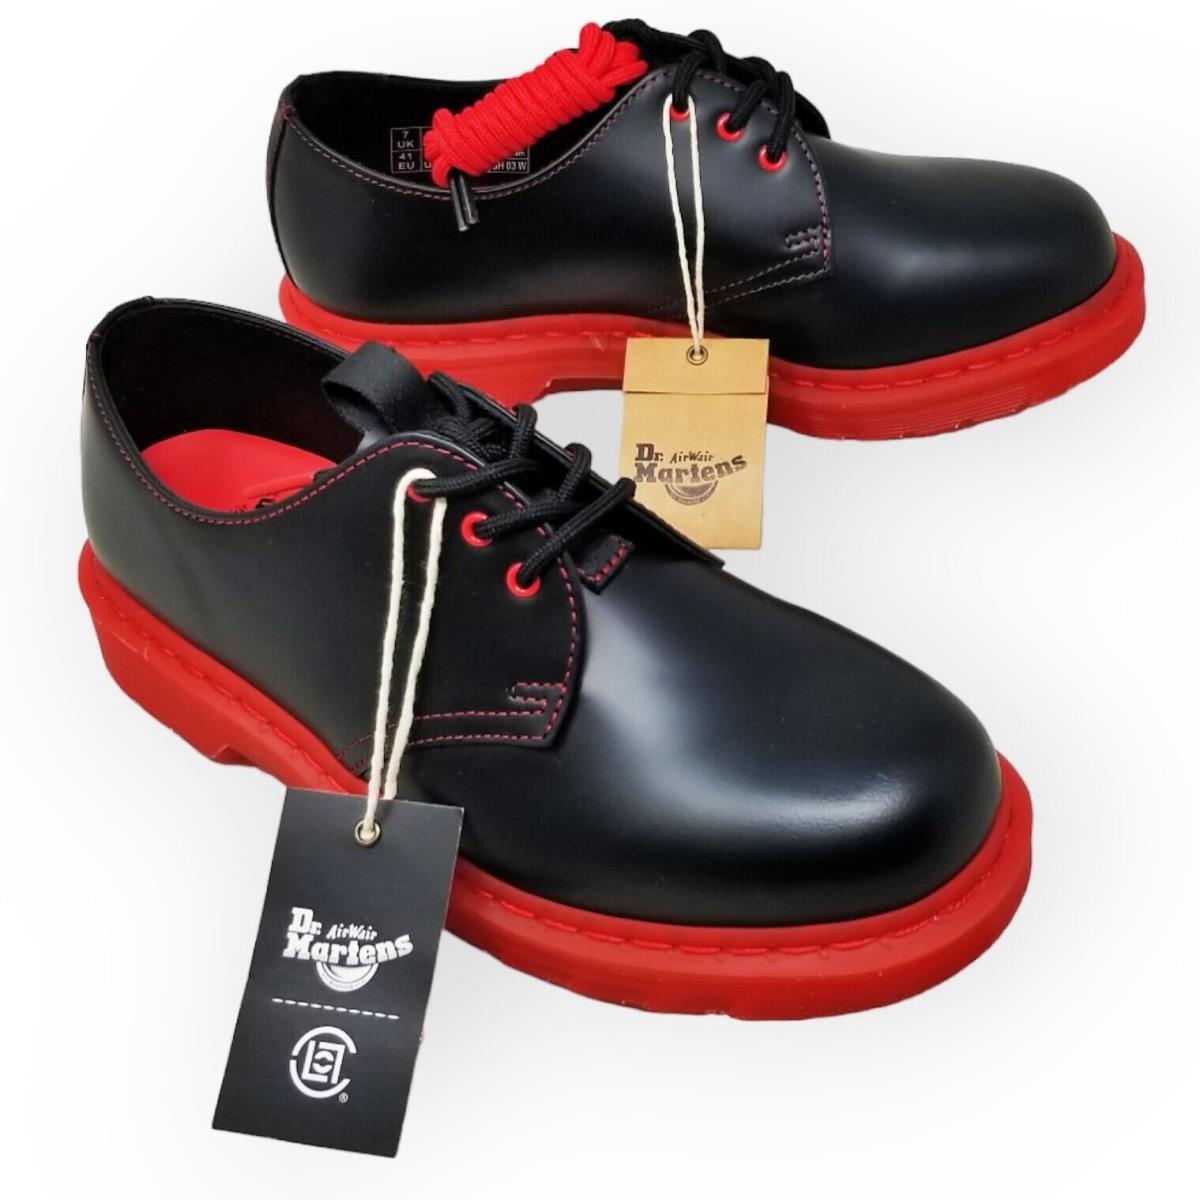 DR Martens 1461 x Clot Leather Oxford Shoes Black Smooth